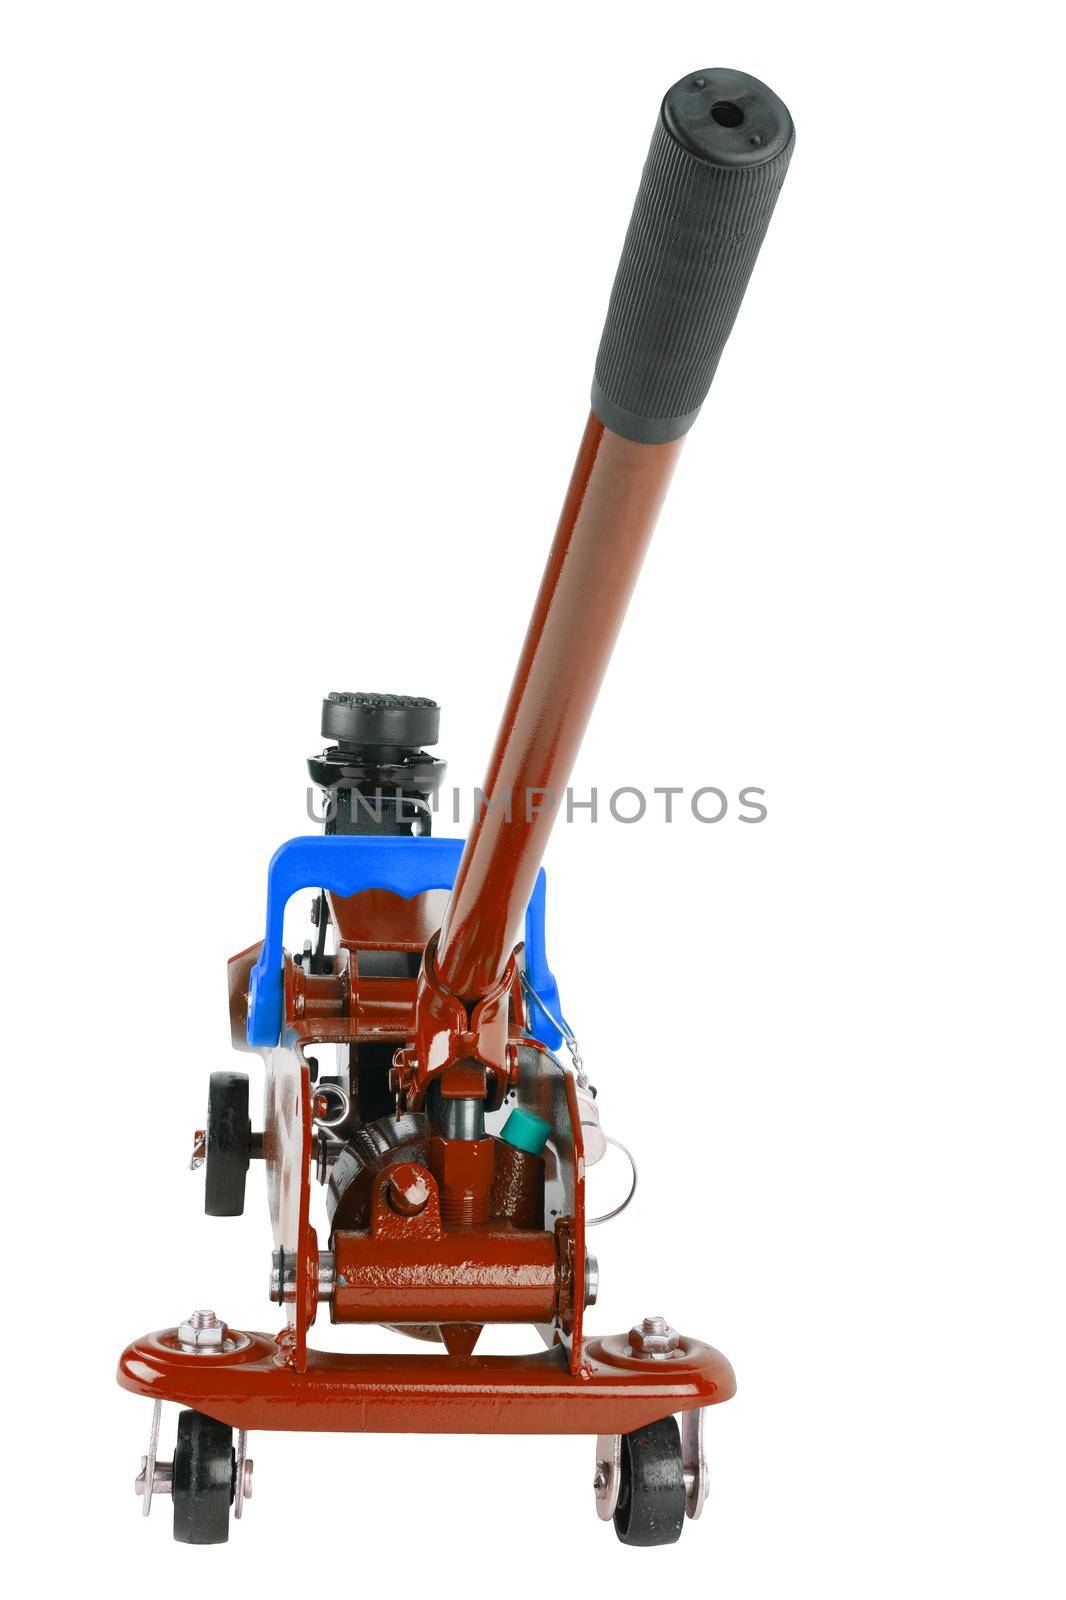 lowered red hydraulic car jack isolated on white background, 2 ton capacity